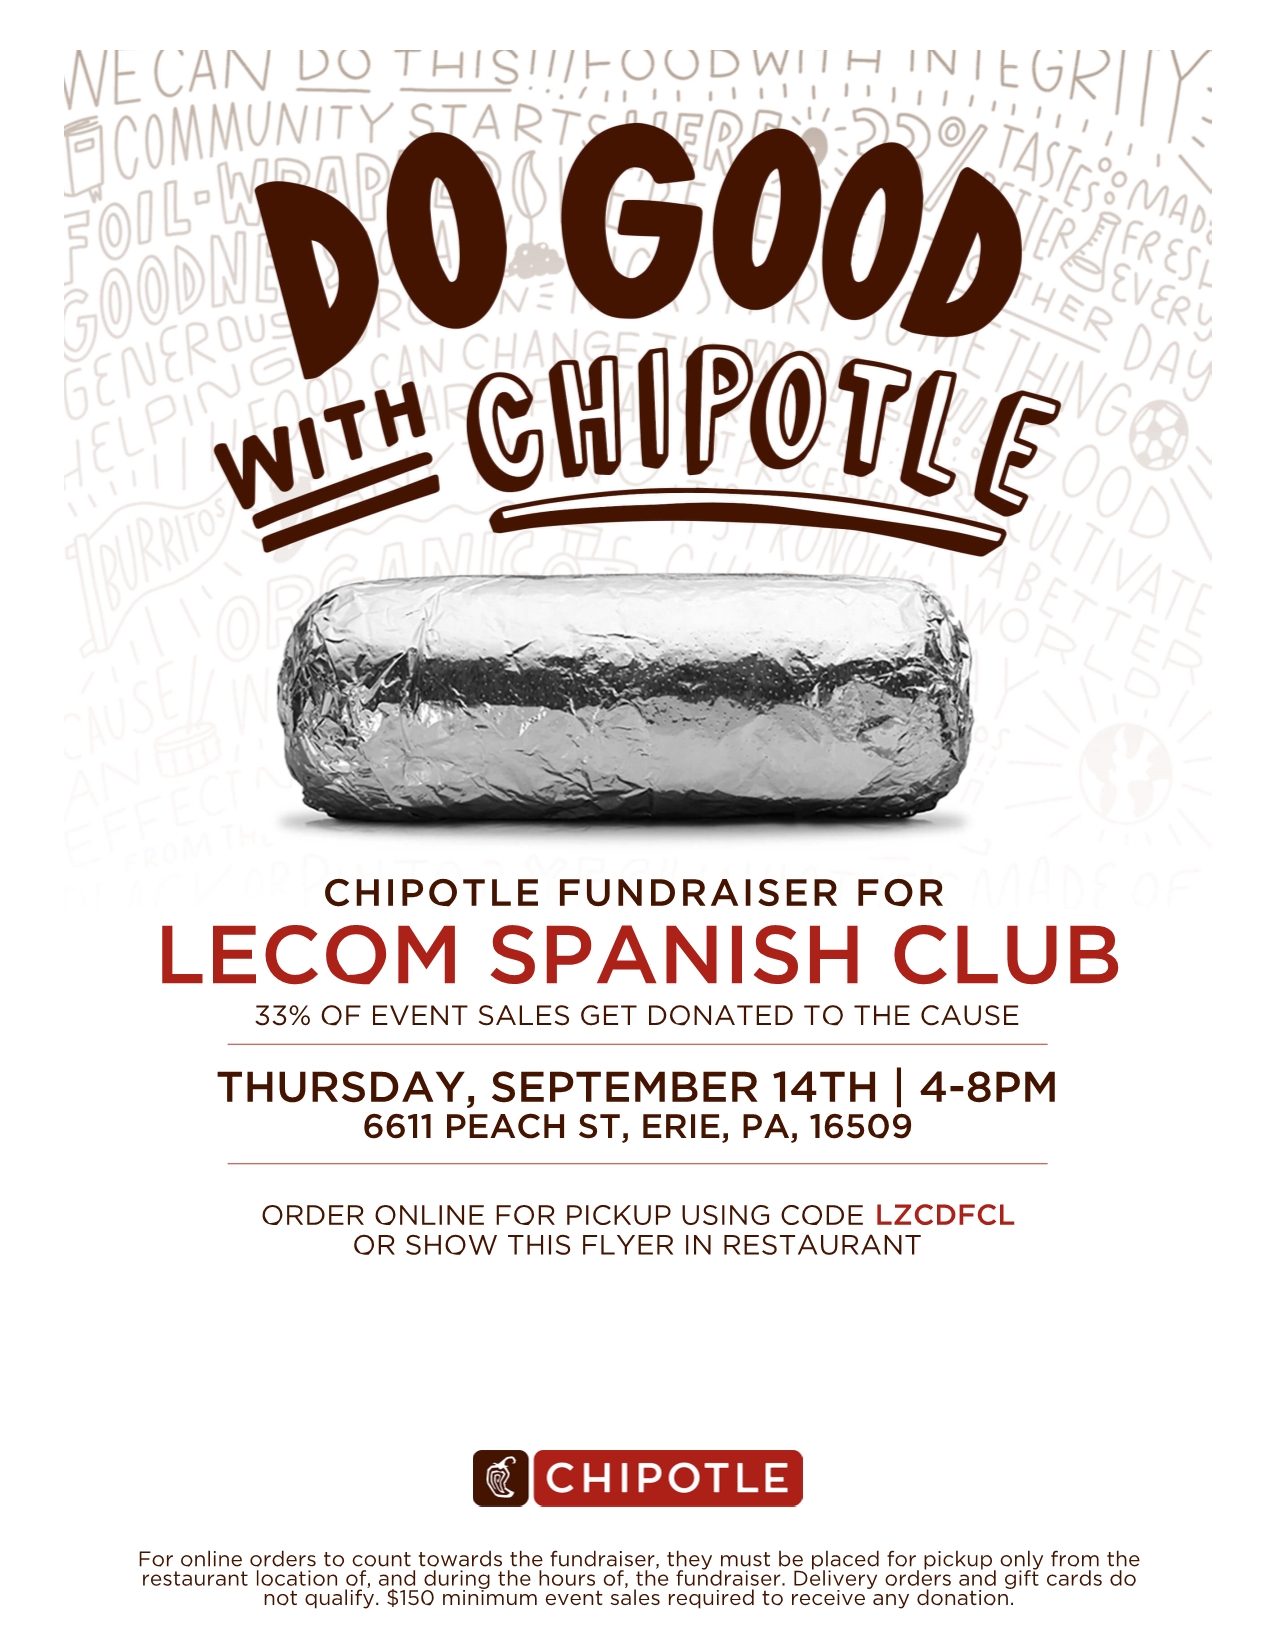 Chipotle Fundraiser Hosted by Medical Spanish Club